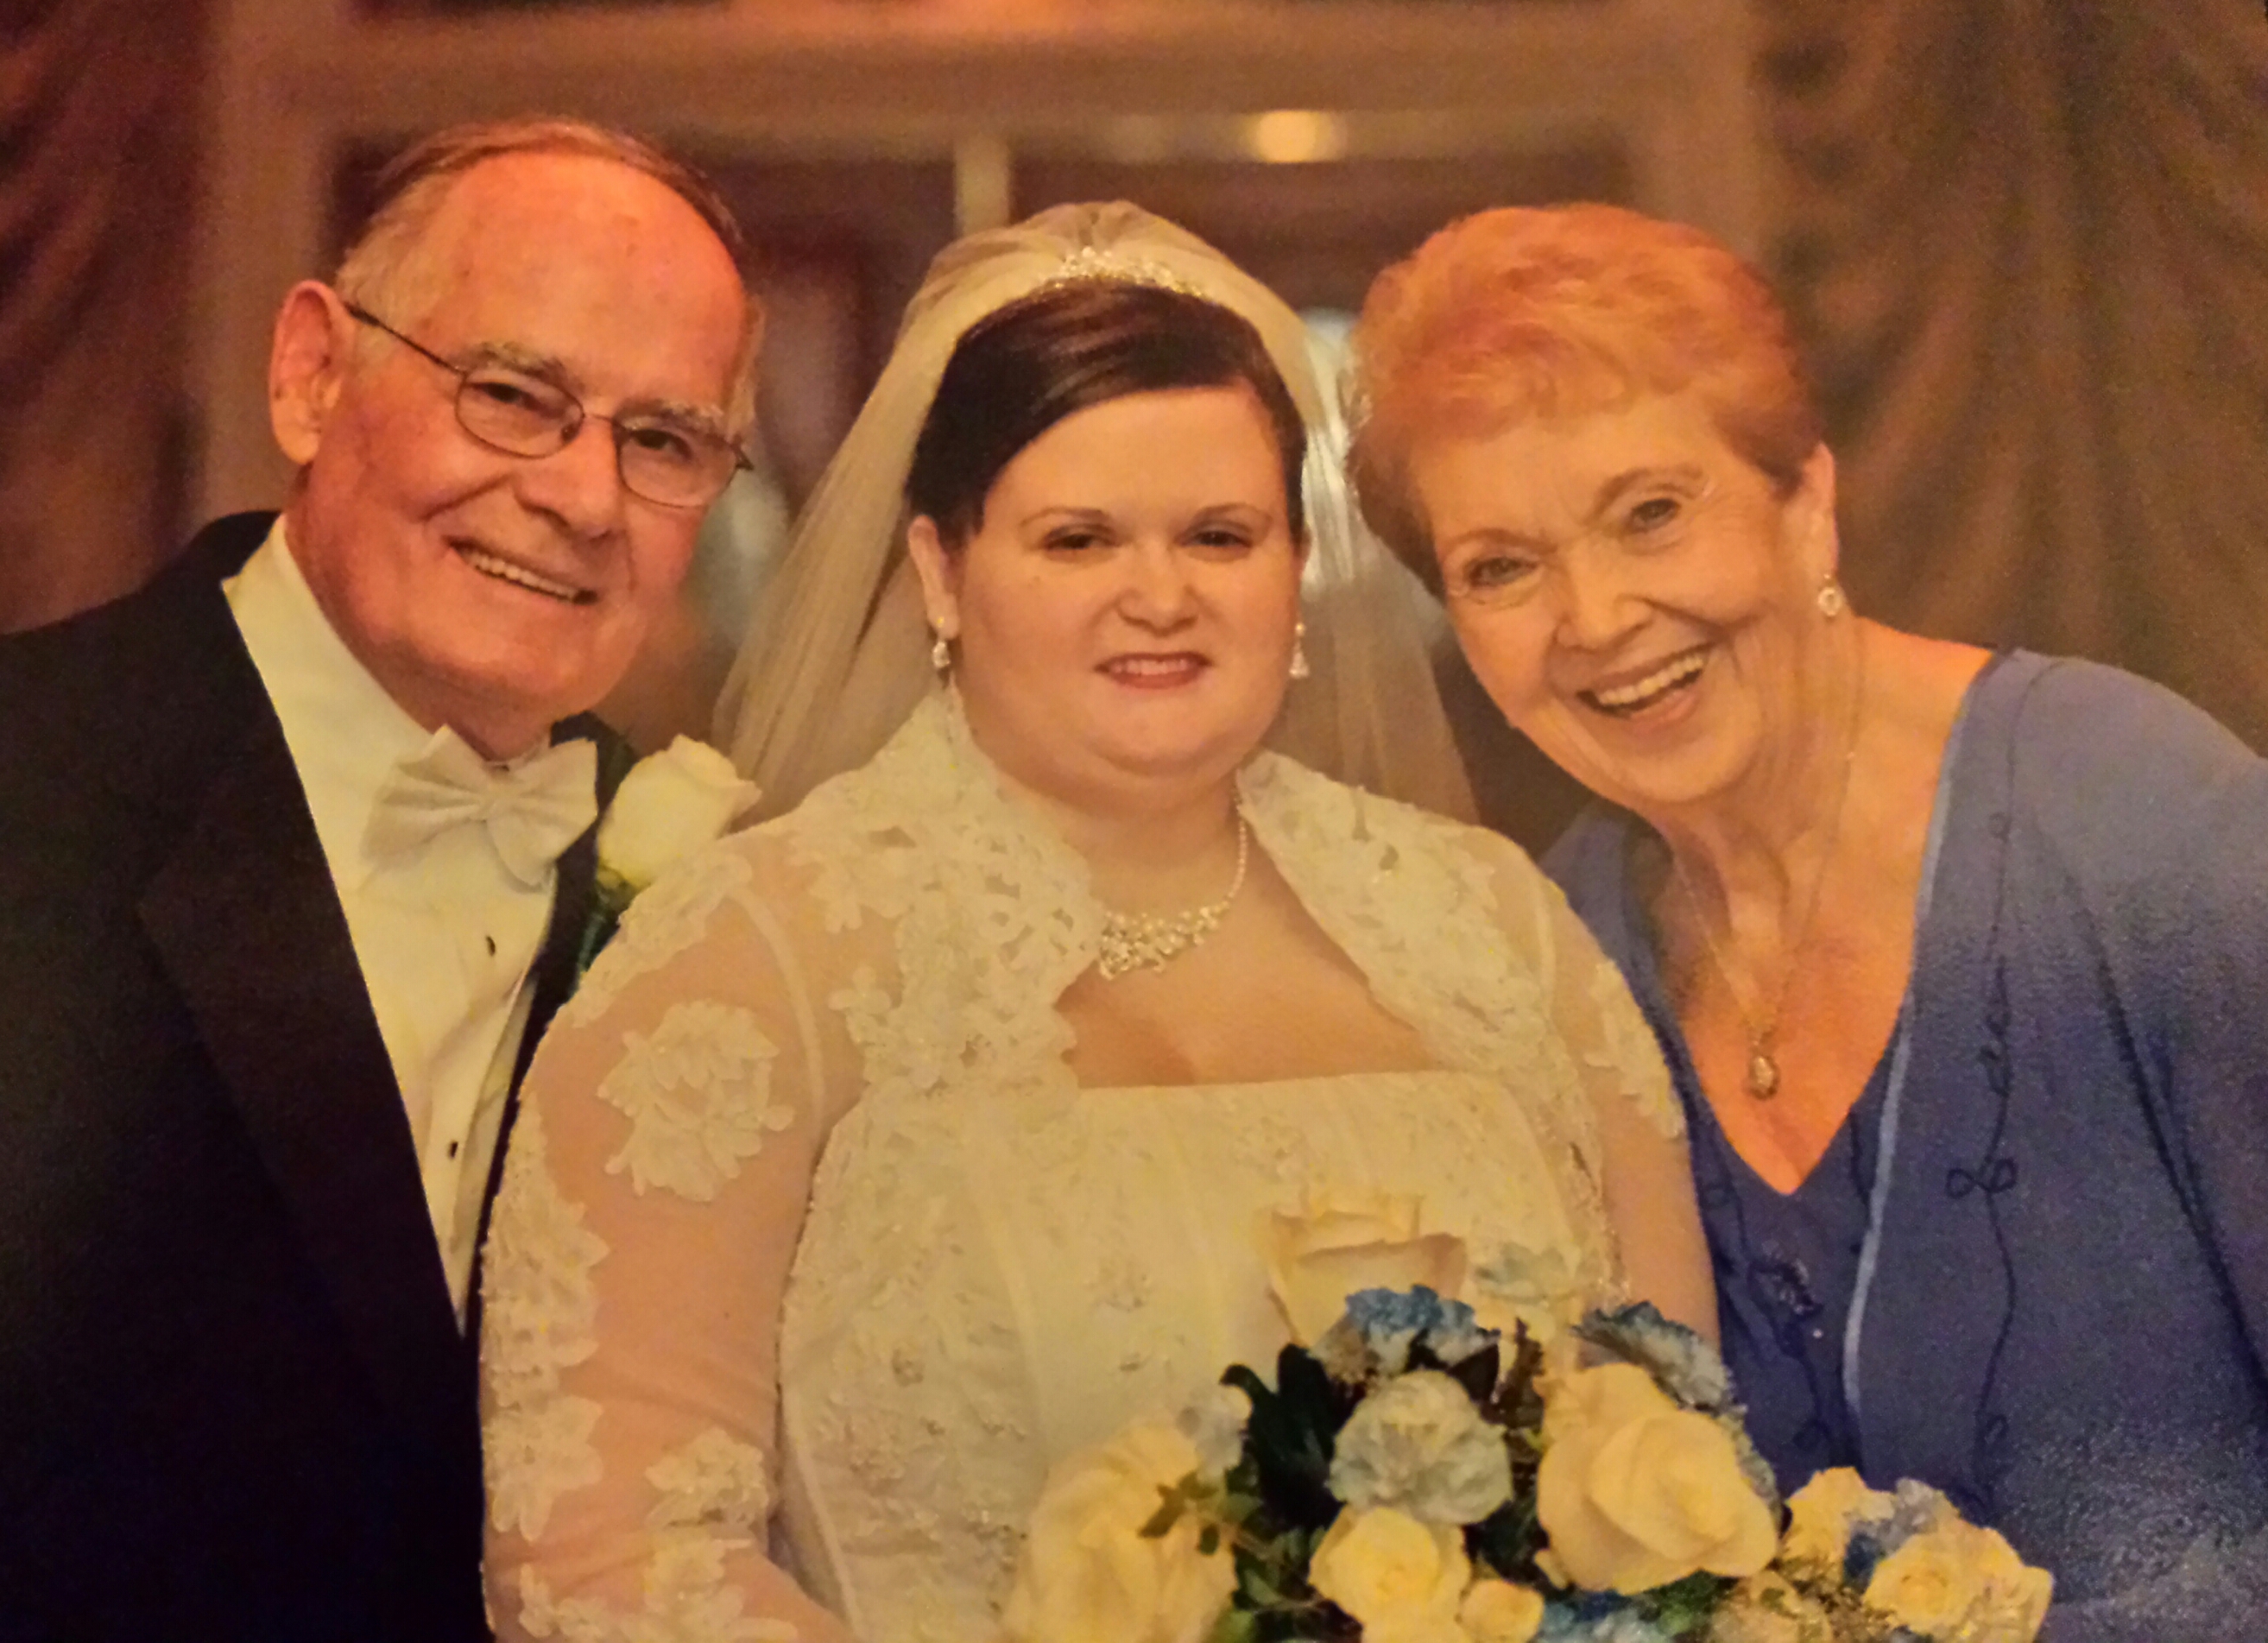 Christal & grandparents. Another favorite!